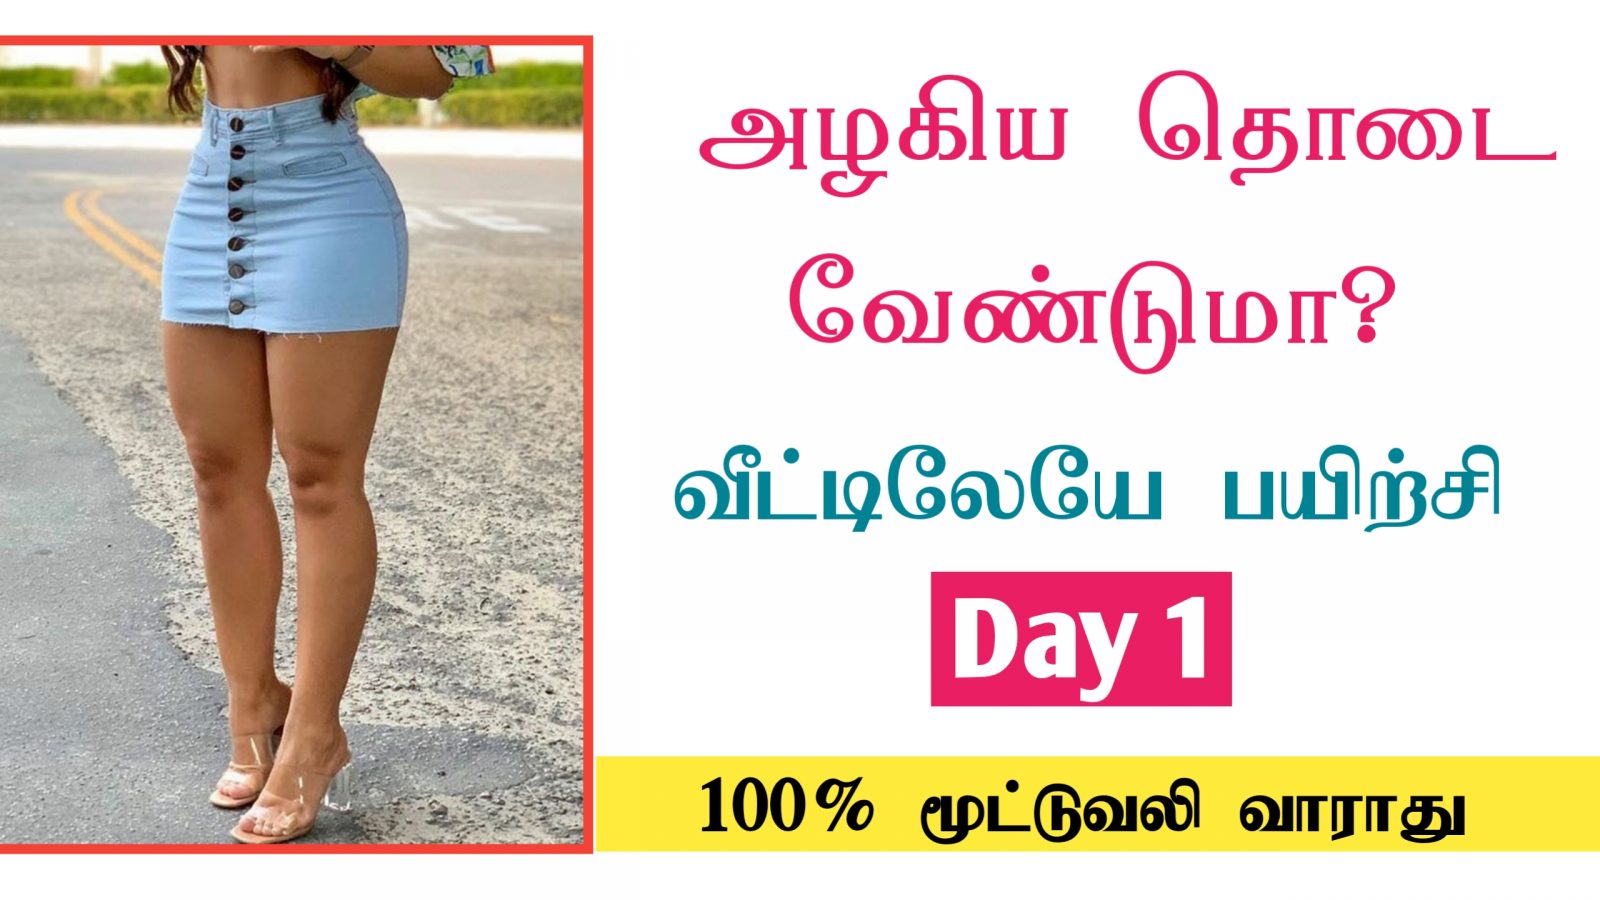 2 Simple Workout for Thighs | Thigh Exercises | அழகிய தொடைக்கு வீட்டிலேயே பயிற்சி | Day 1